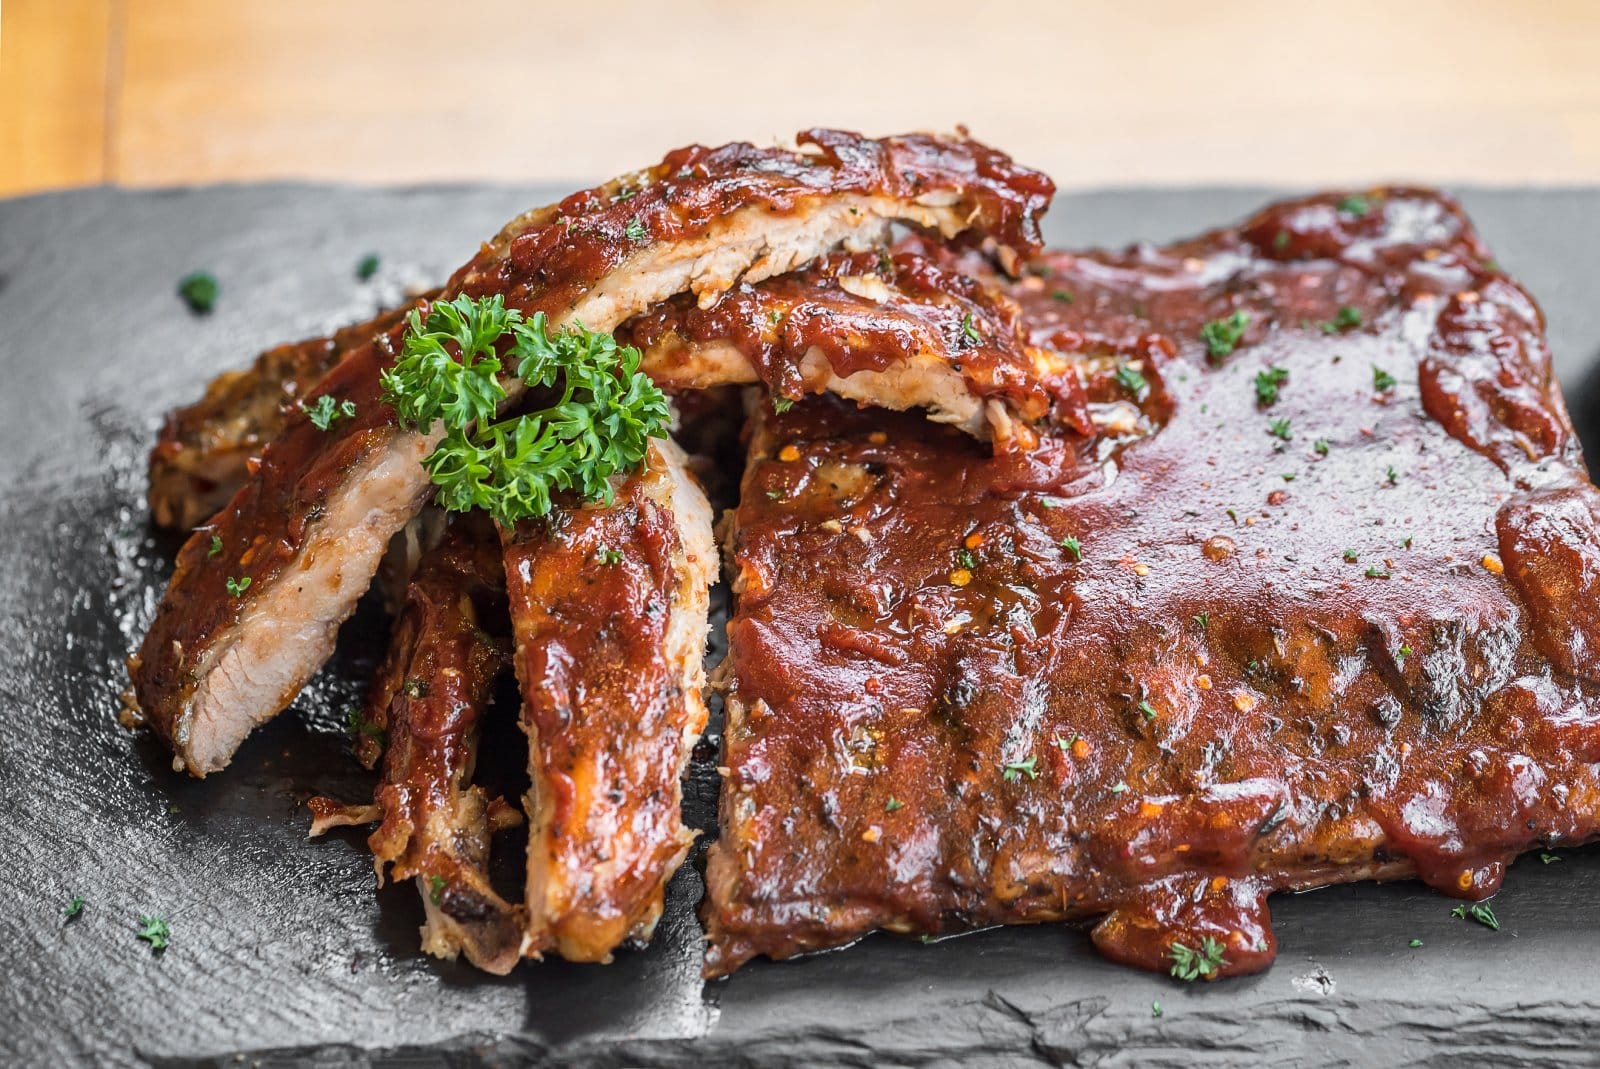 Image Credit: Shutterstock / vichie81 <p><span>Slow-cooked to perfection, American barbecue ribs, slathered in a tangy, smoky sauce, are a finger-licking journey to the heart of American cuisine.</span></p>